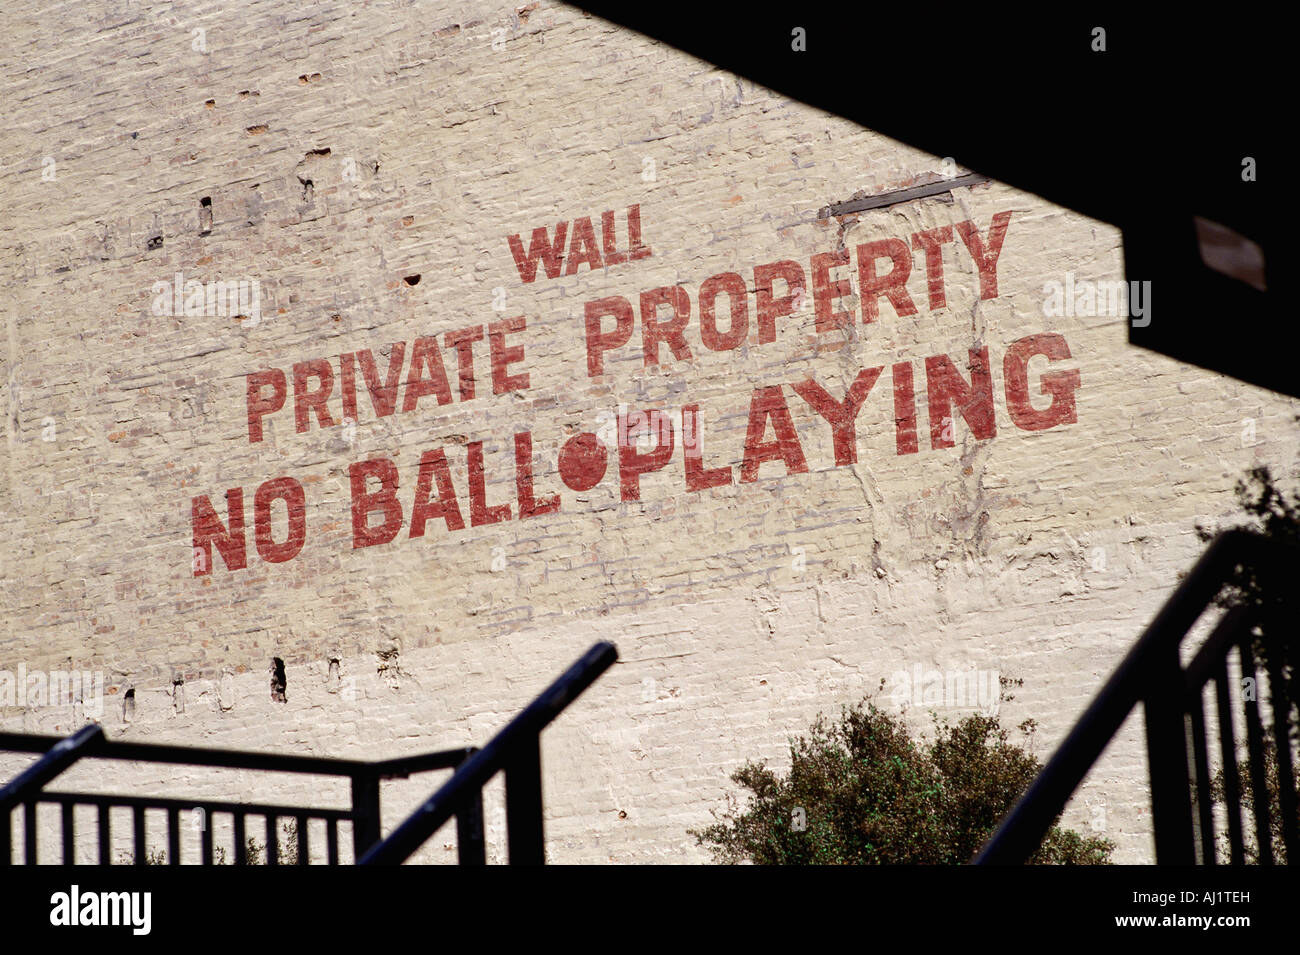 Manhattan New York USA Private wall Wall Private Property No Ball Playing Stock Photo